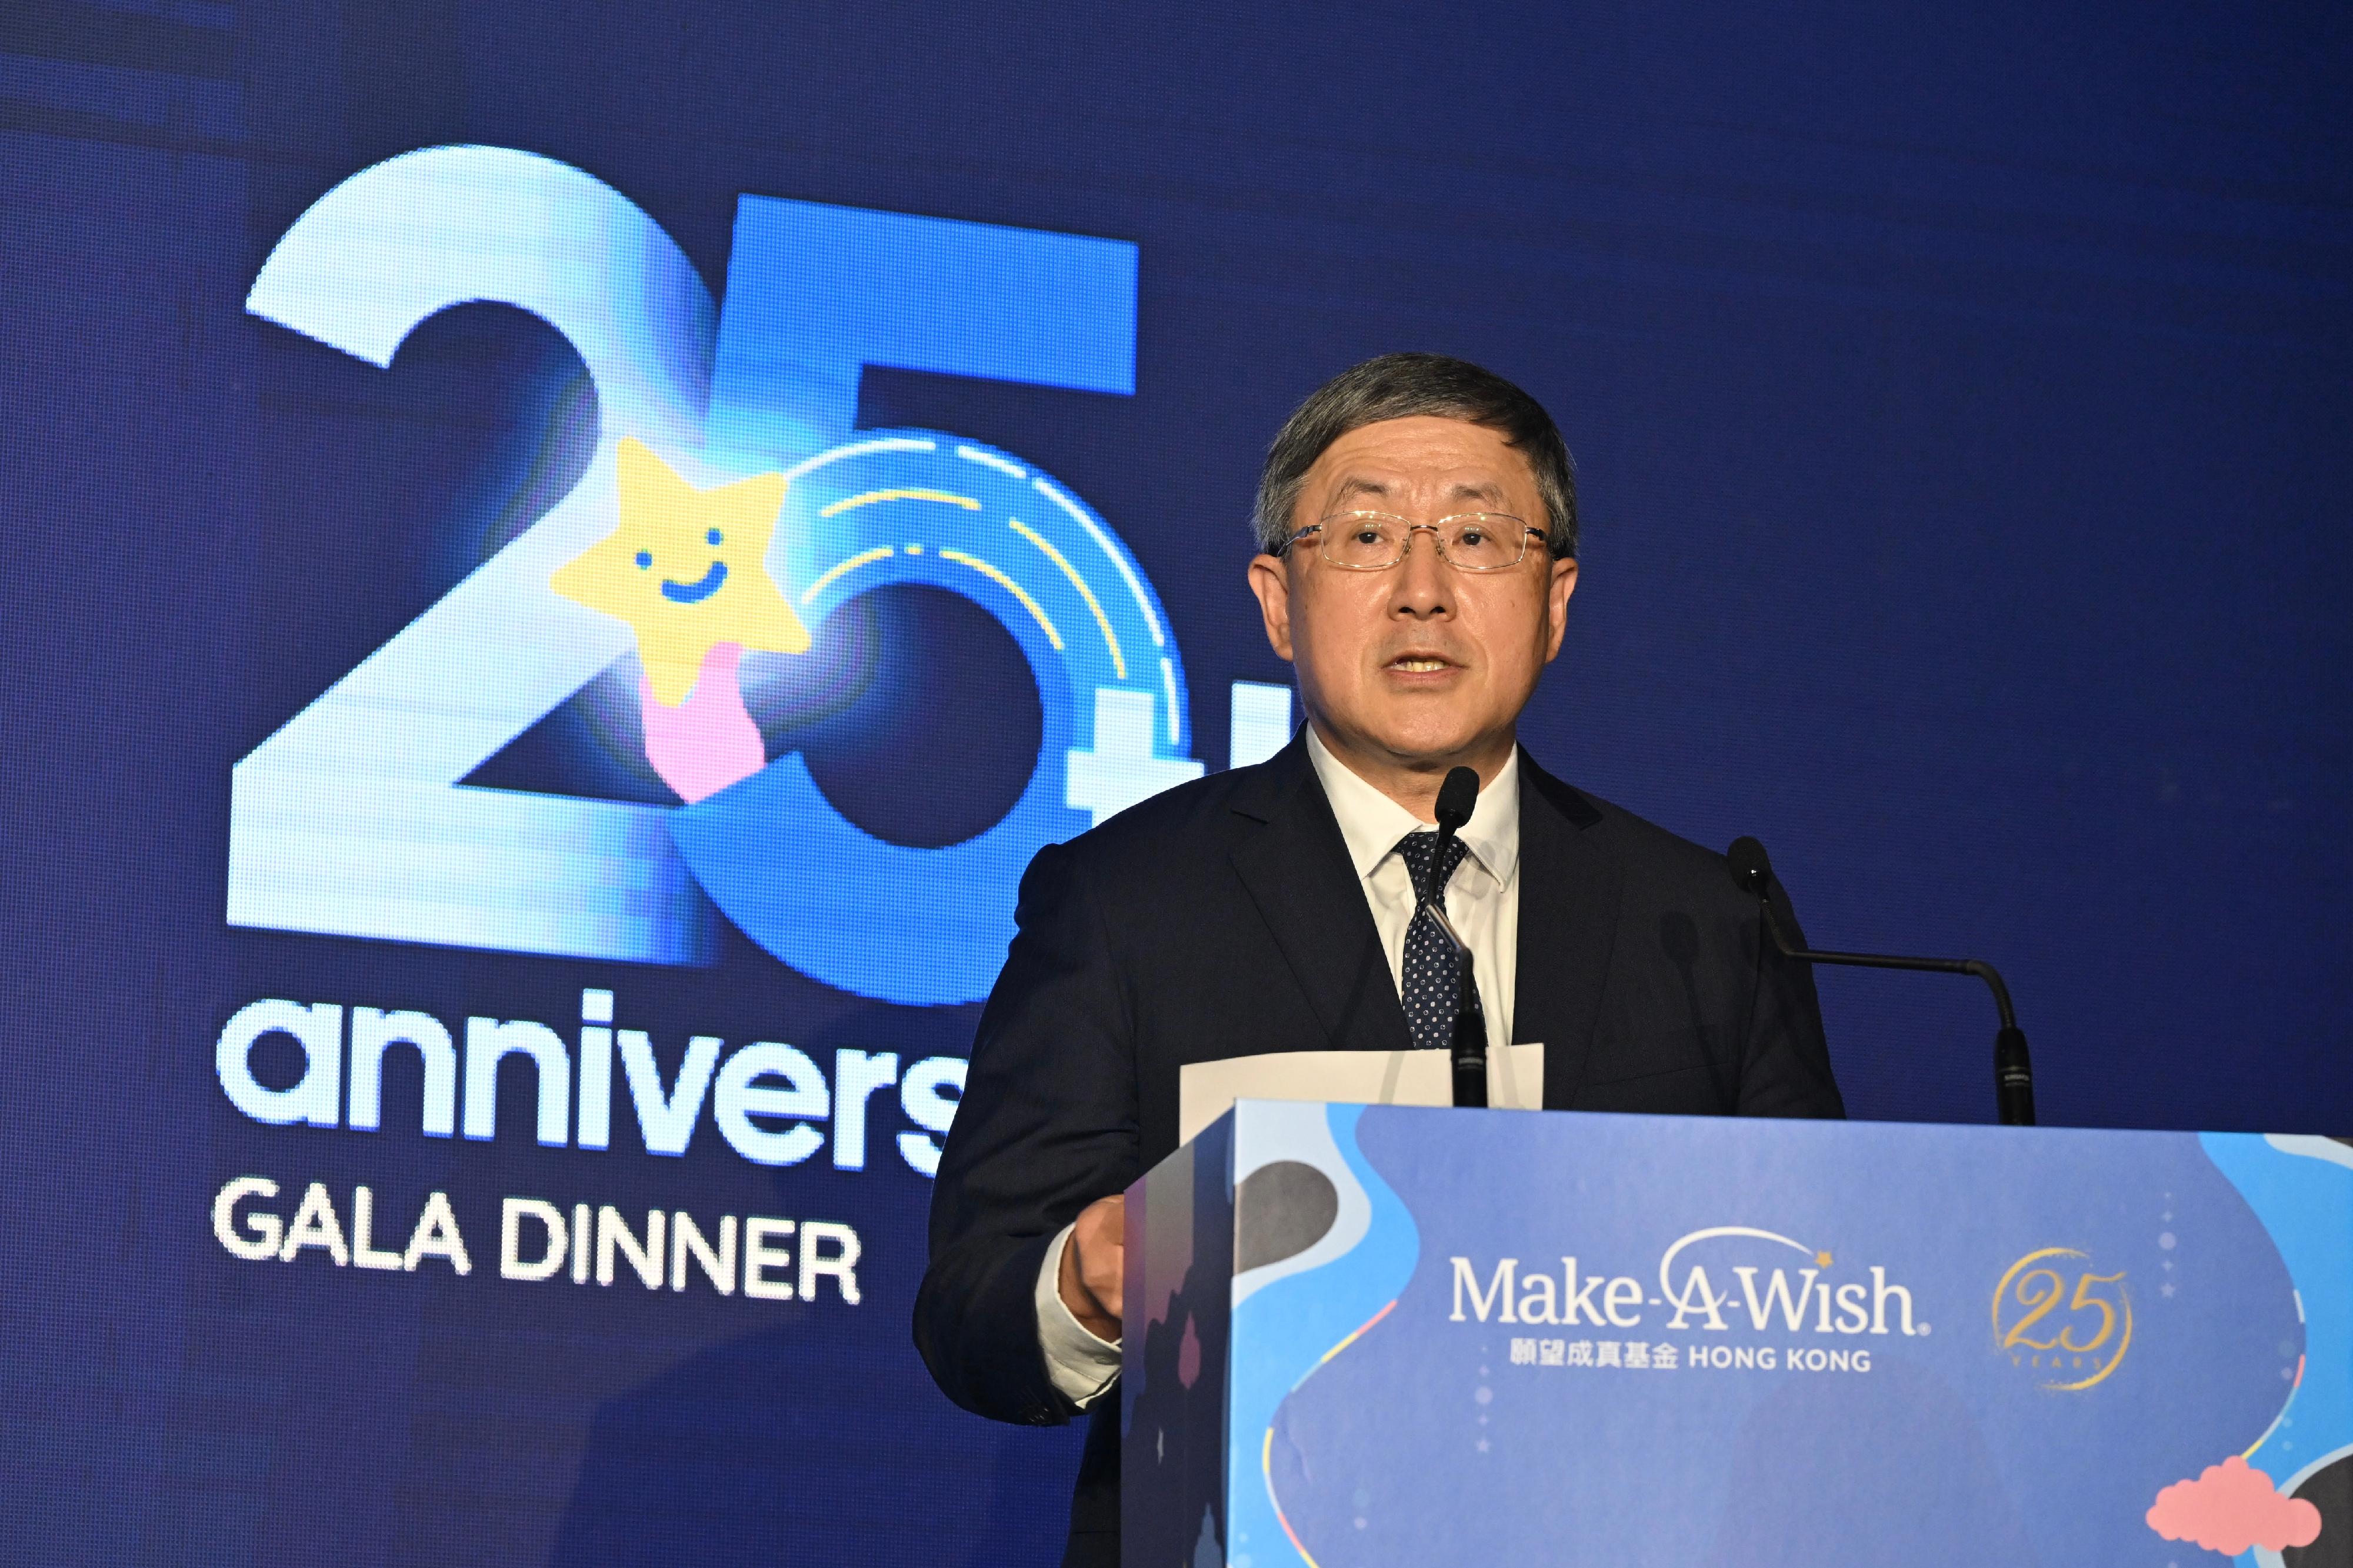 The Deputy Chief Secretary for Administration, Mr Cheuk Wing-hing, speaks at Make-A-Wish Hong Kong 25th Anniversary Gala Dinner tonight (March 3).